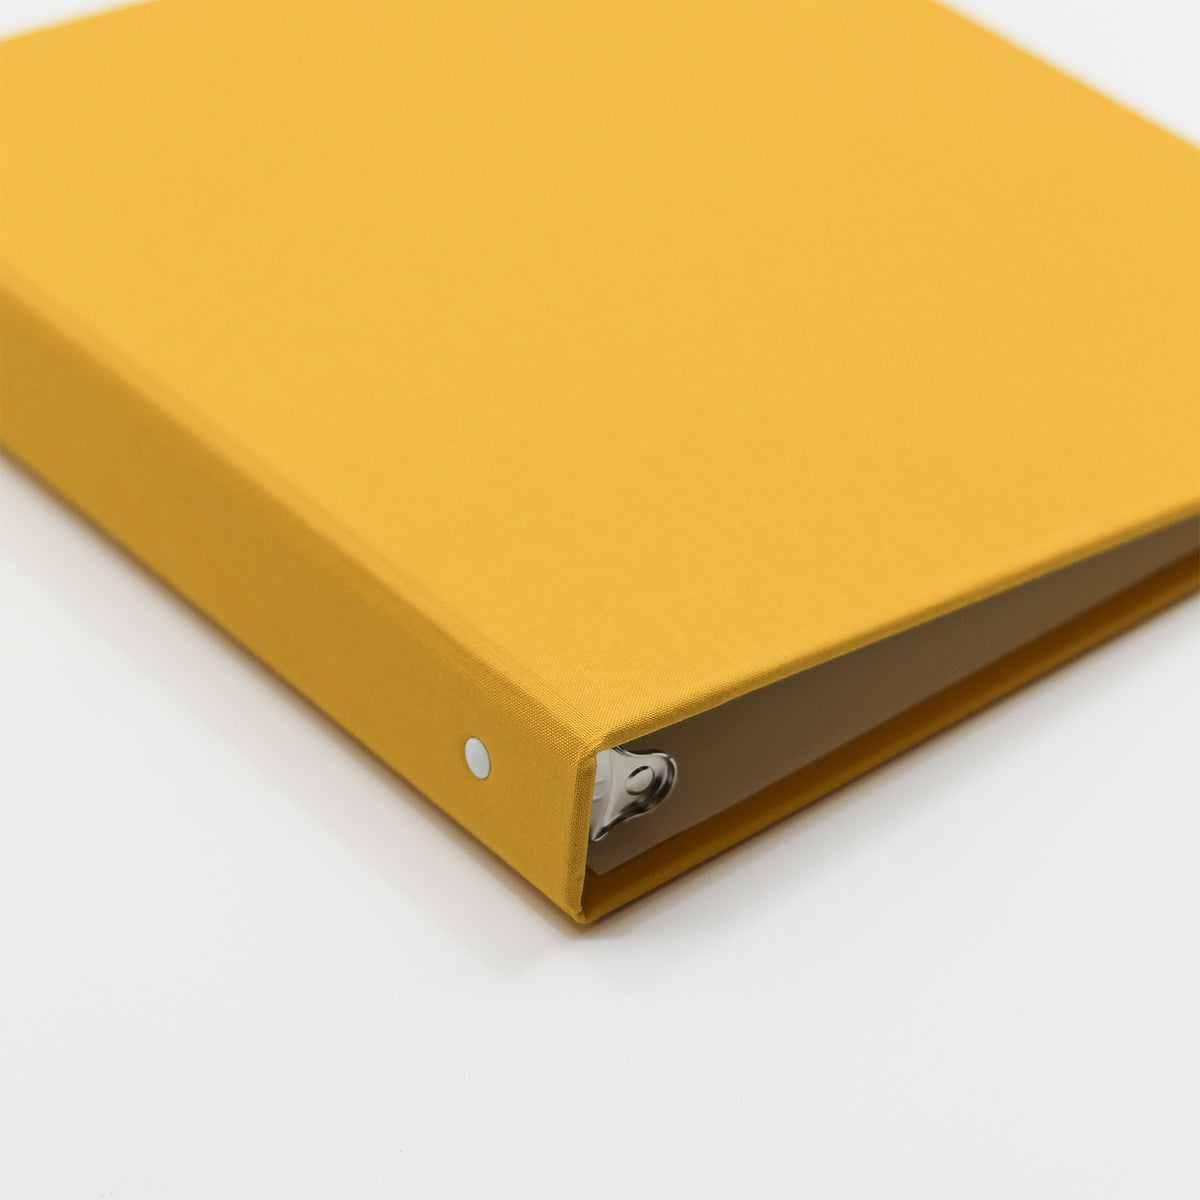 Storage Binder for Photos or Documents with Mango Cotton Cover